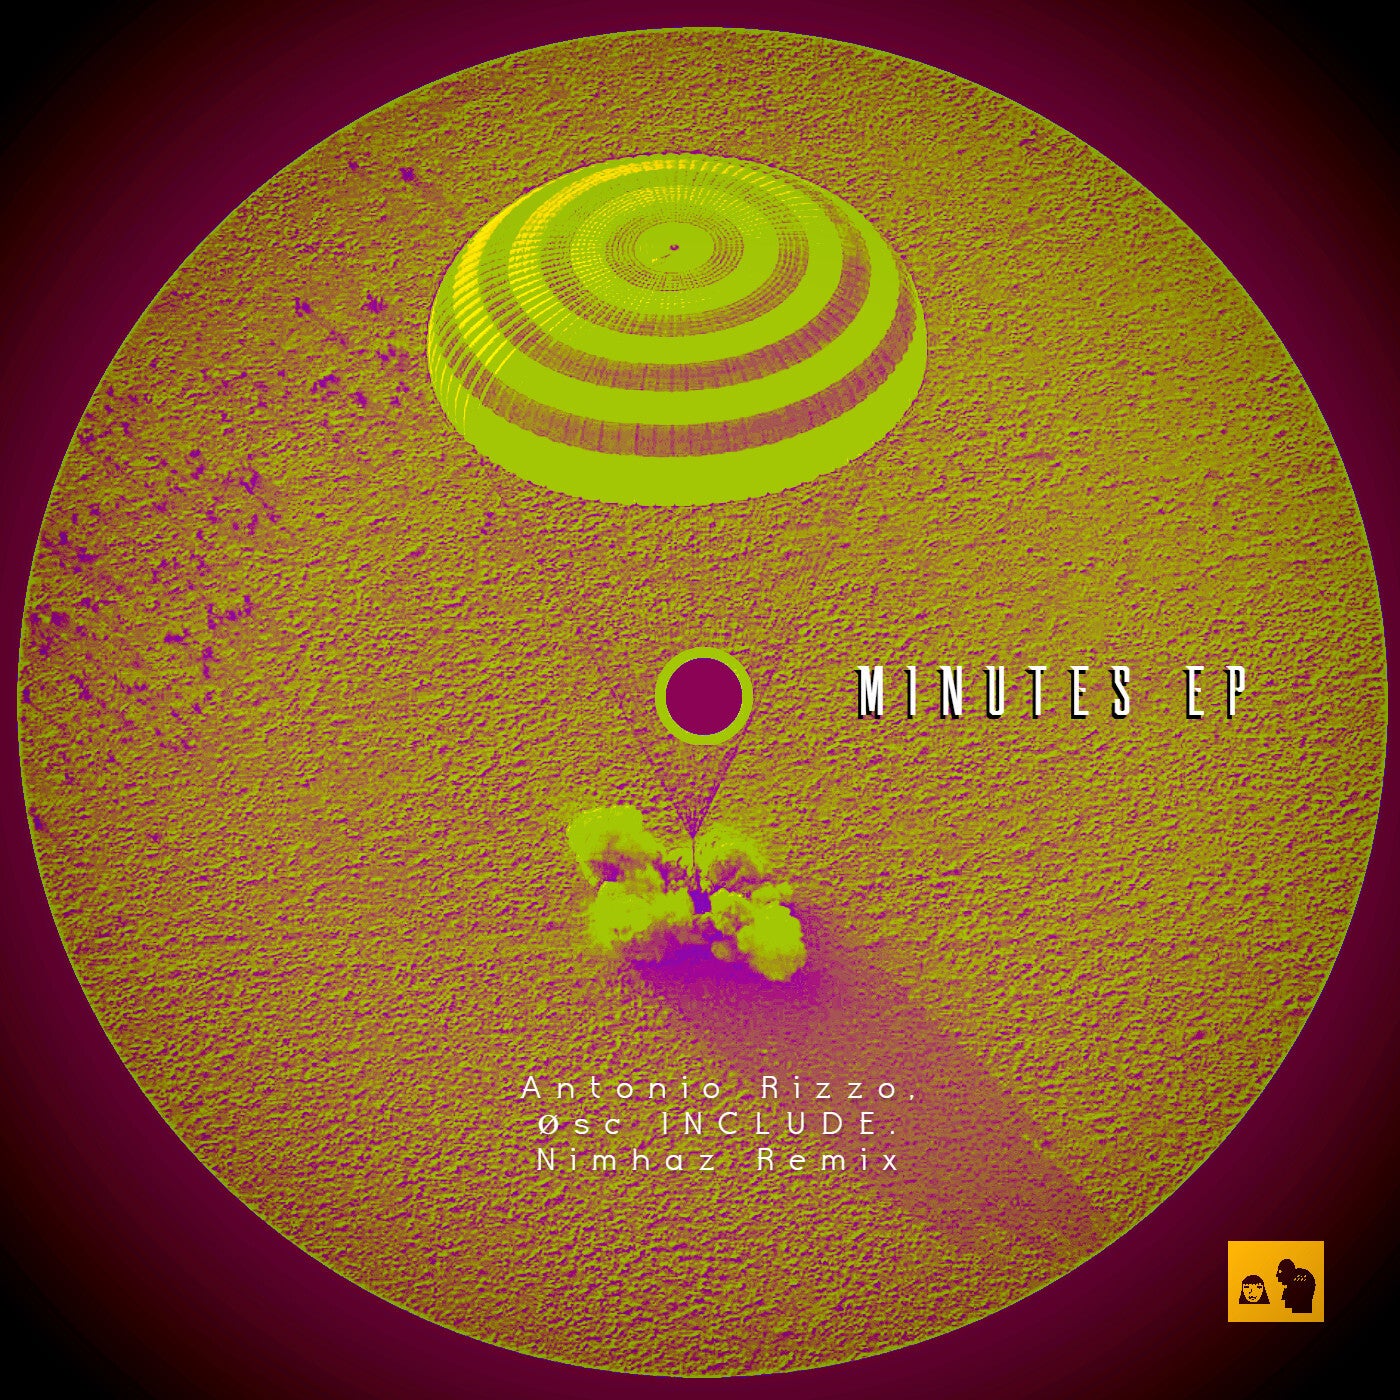 Minutes EP